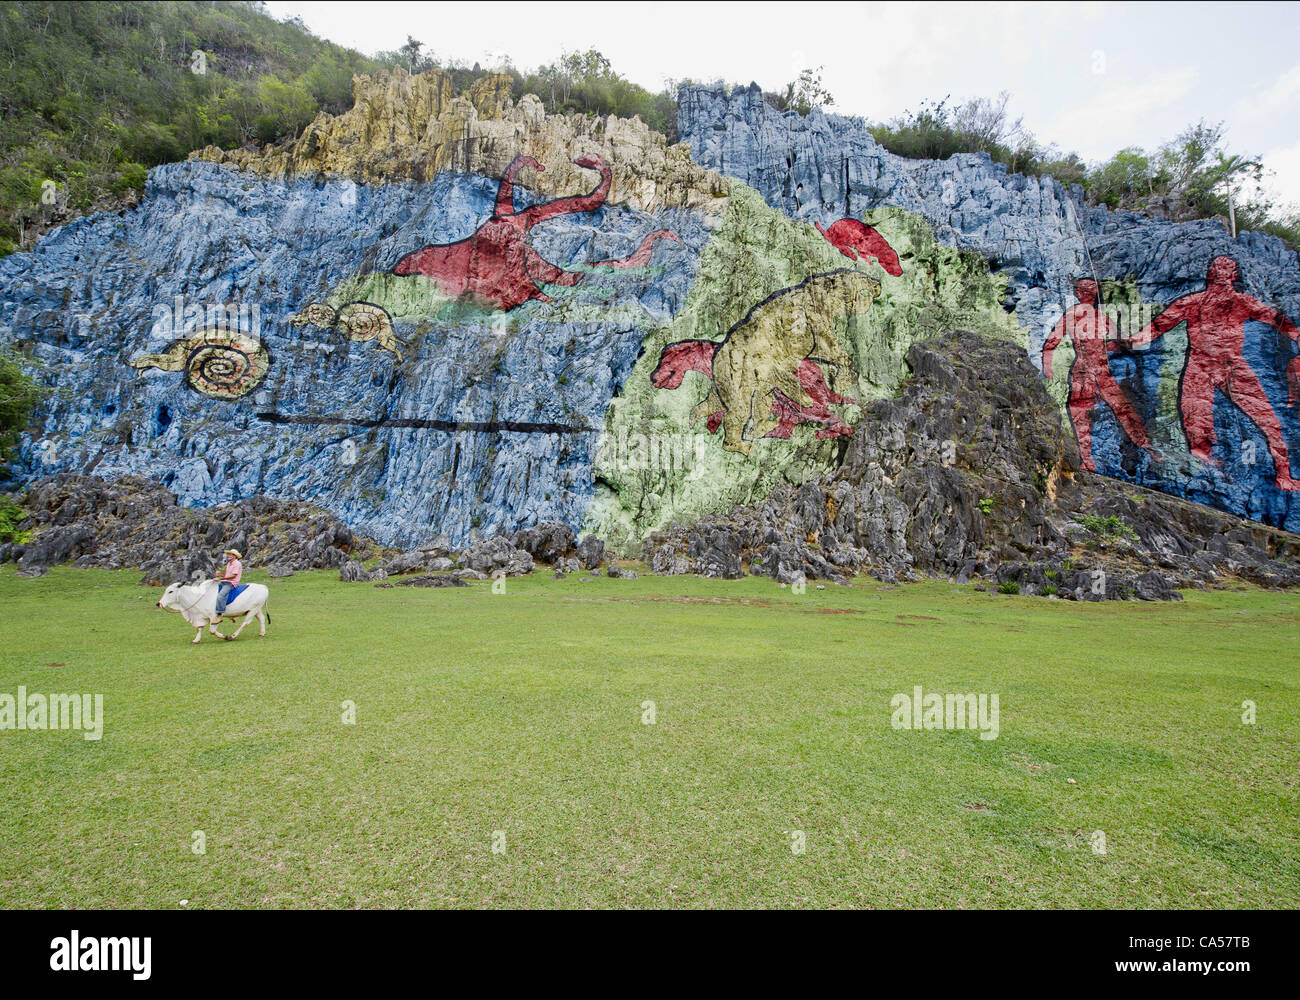 May 5, 2012 - Vinales, U.S. - The Mural de la Prehistoria (the Prehistory Wall), said to be one of the largest outdoor painted murals in the world, describes the evolution of life in Cuba. The mural, which took four years to complete and is on a limestone hill in the Vinales Valley, is primarily a t Stock Photo